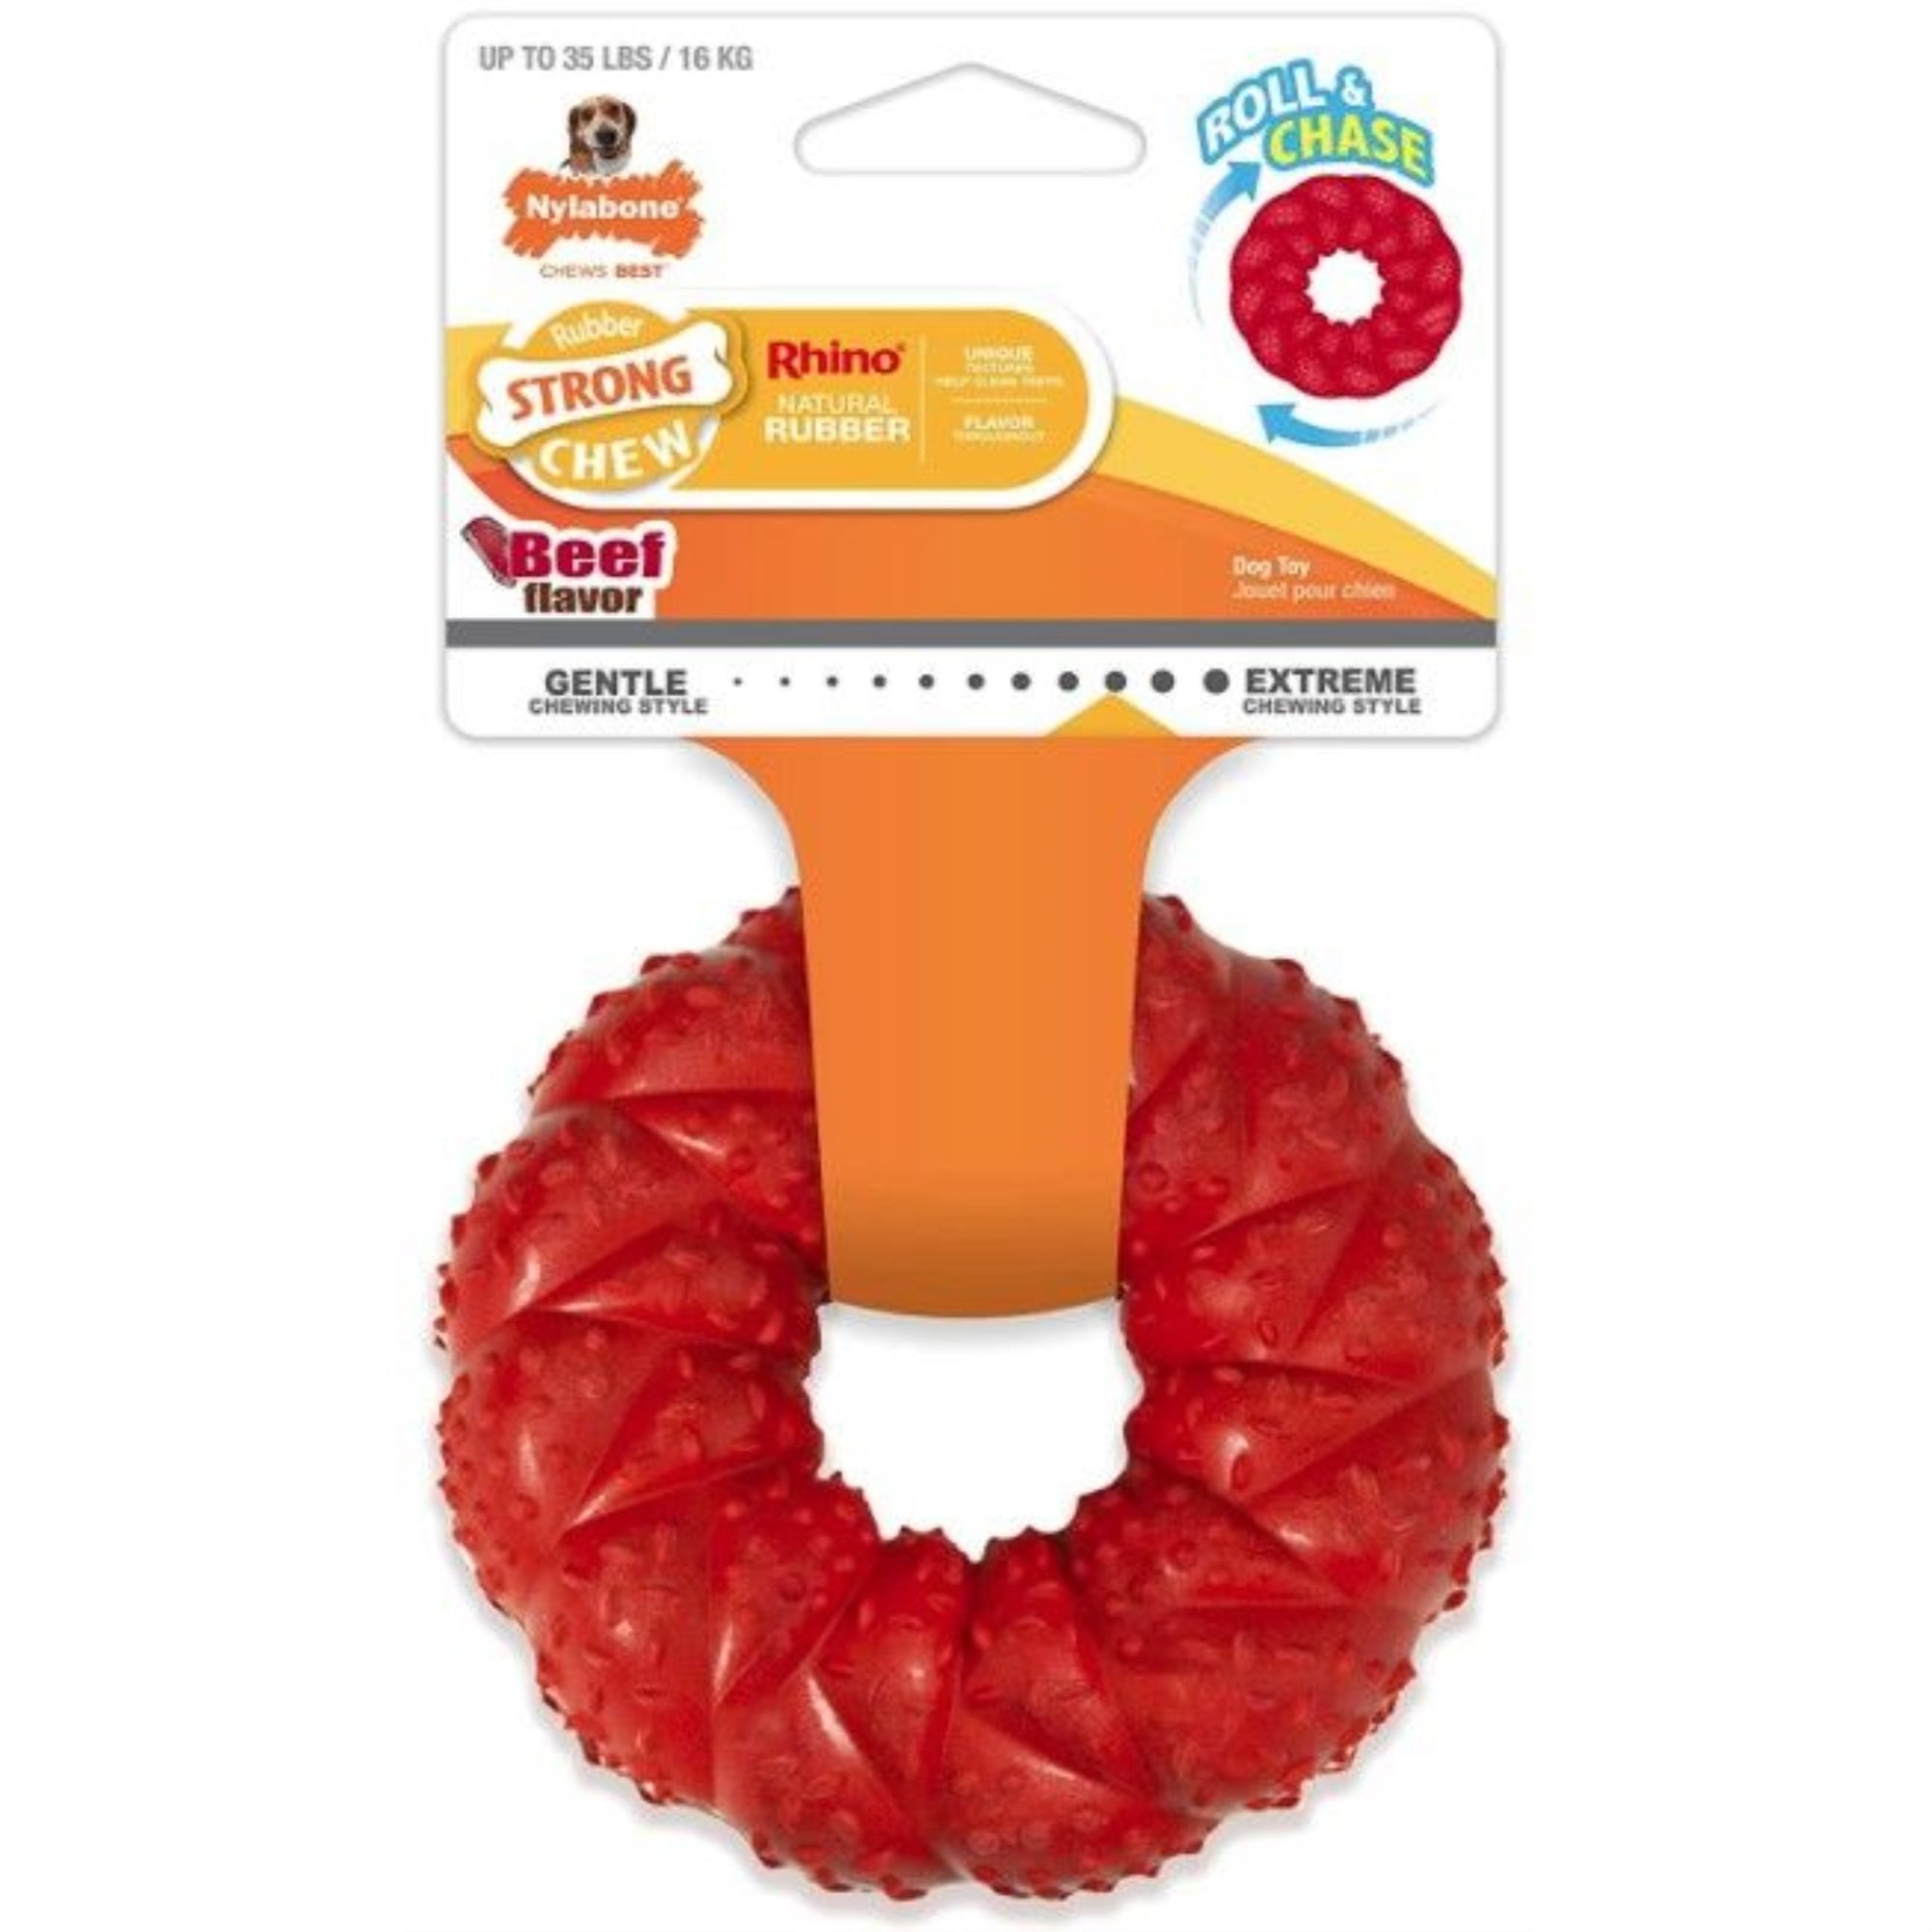 Nylabone Strong Chew Rubber Senior Dog Chew Toy Beef Flavor X-Large/Souper  - 50+ lbs, Orange (1 Count)